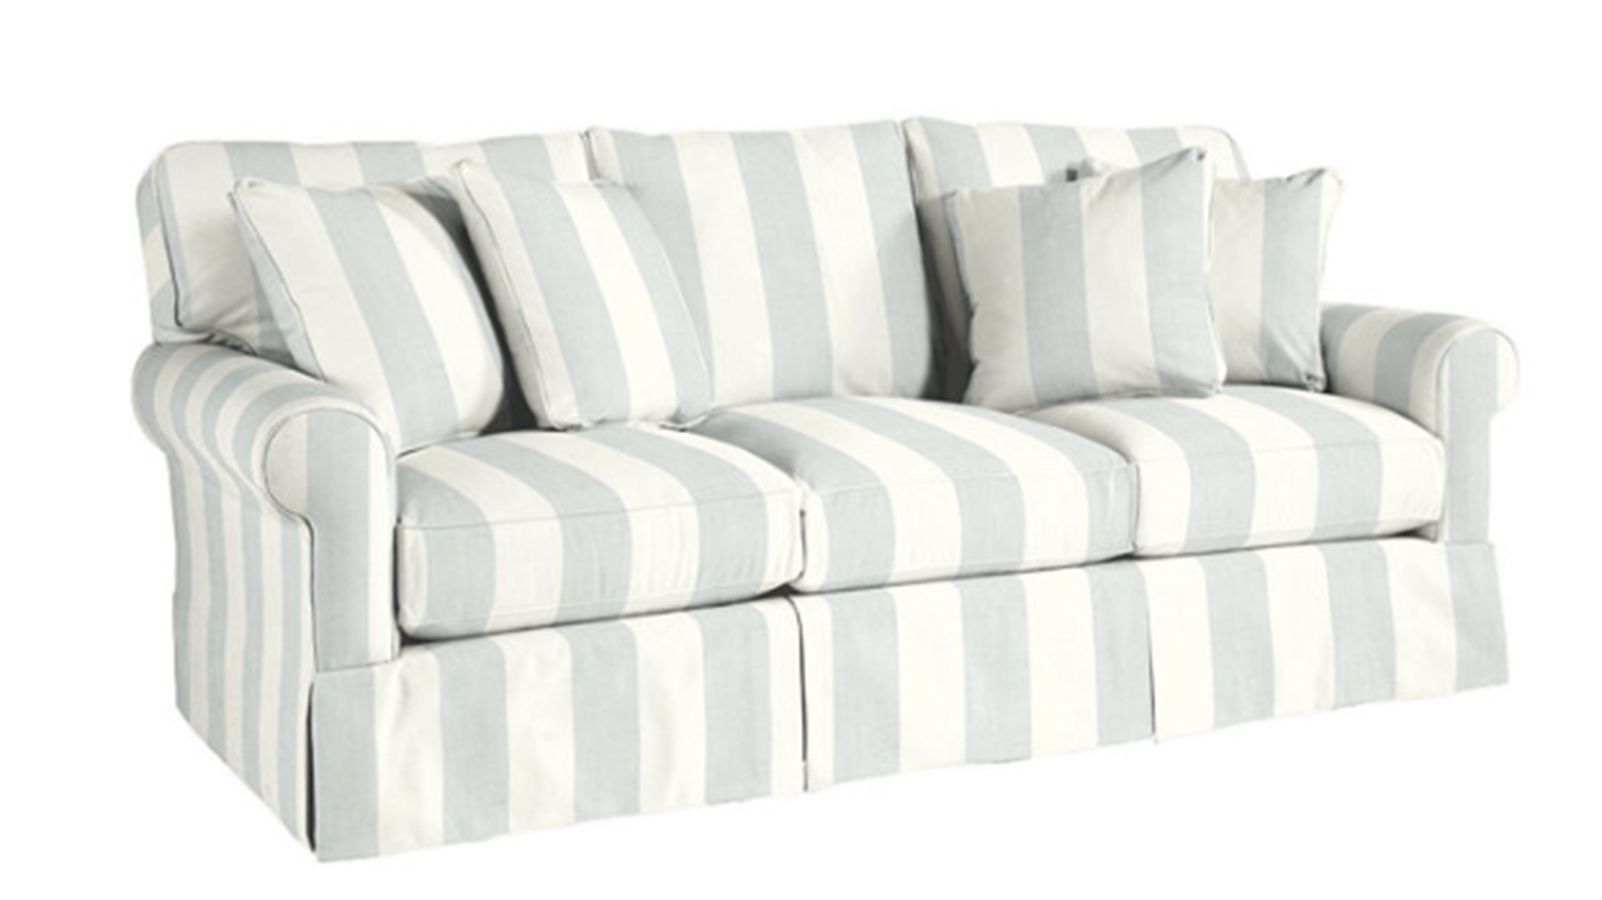 Black And White Striped Sofa Bed Cabinets Matttroy